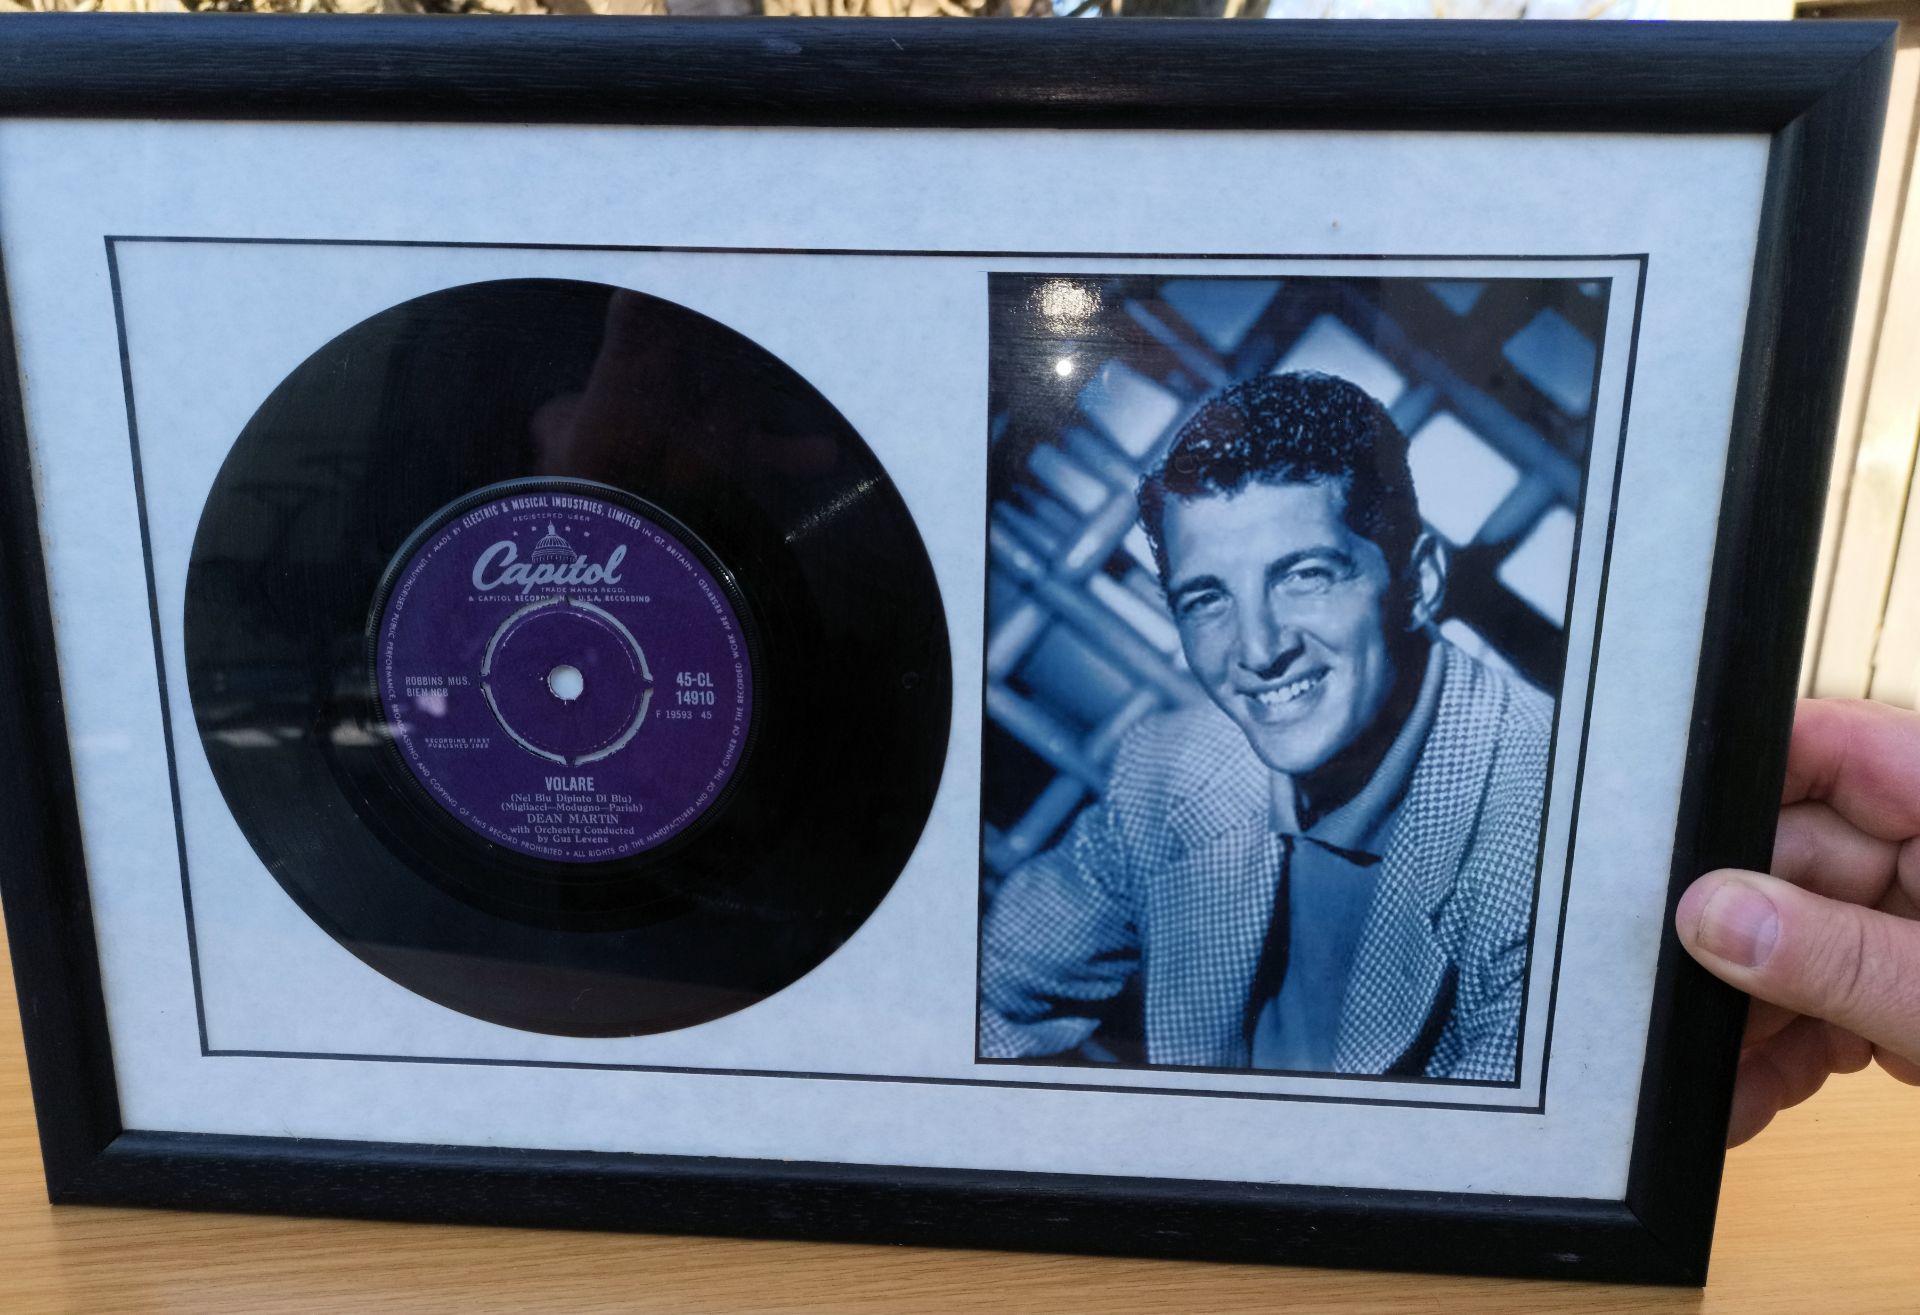 1 x Framed Dean Martin single (Volare) and Picture - CL355 - Location: Great YarmouthPlease